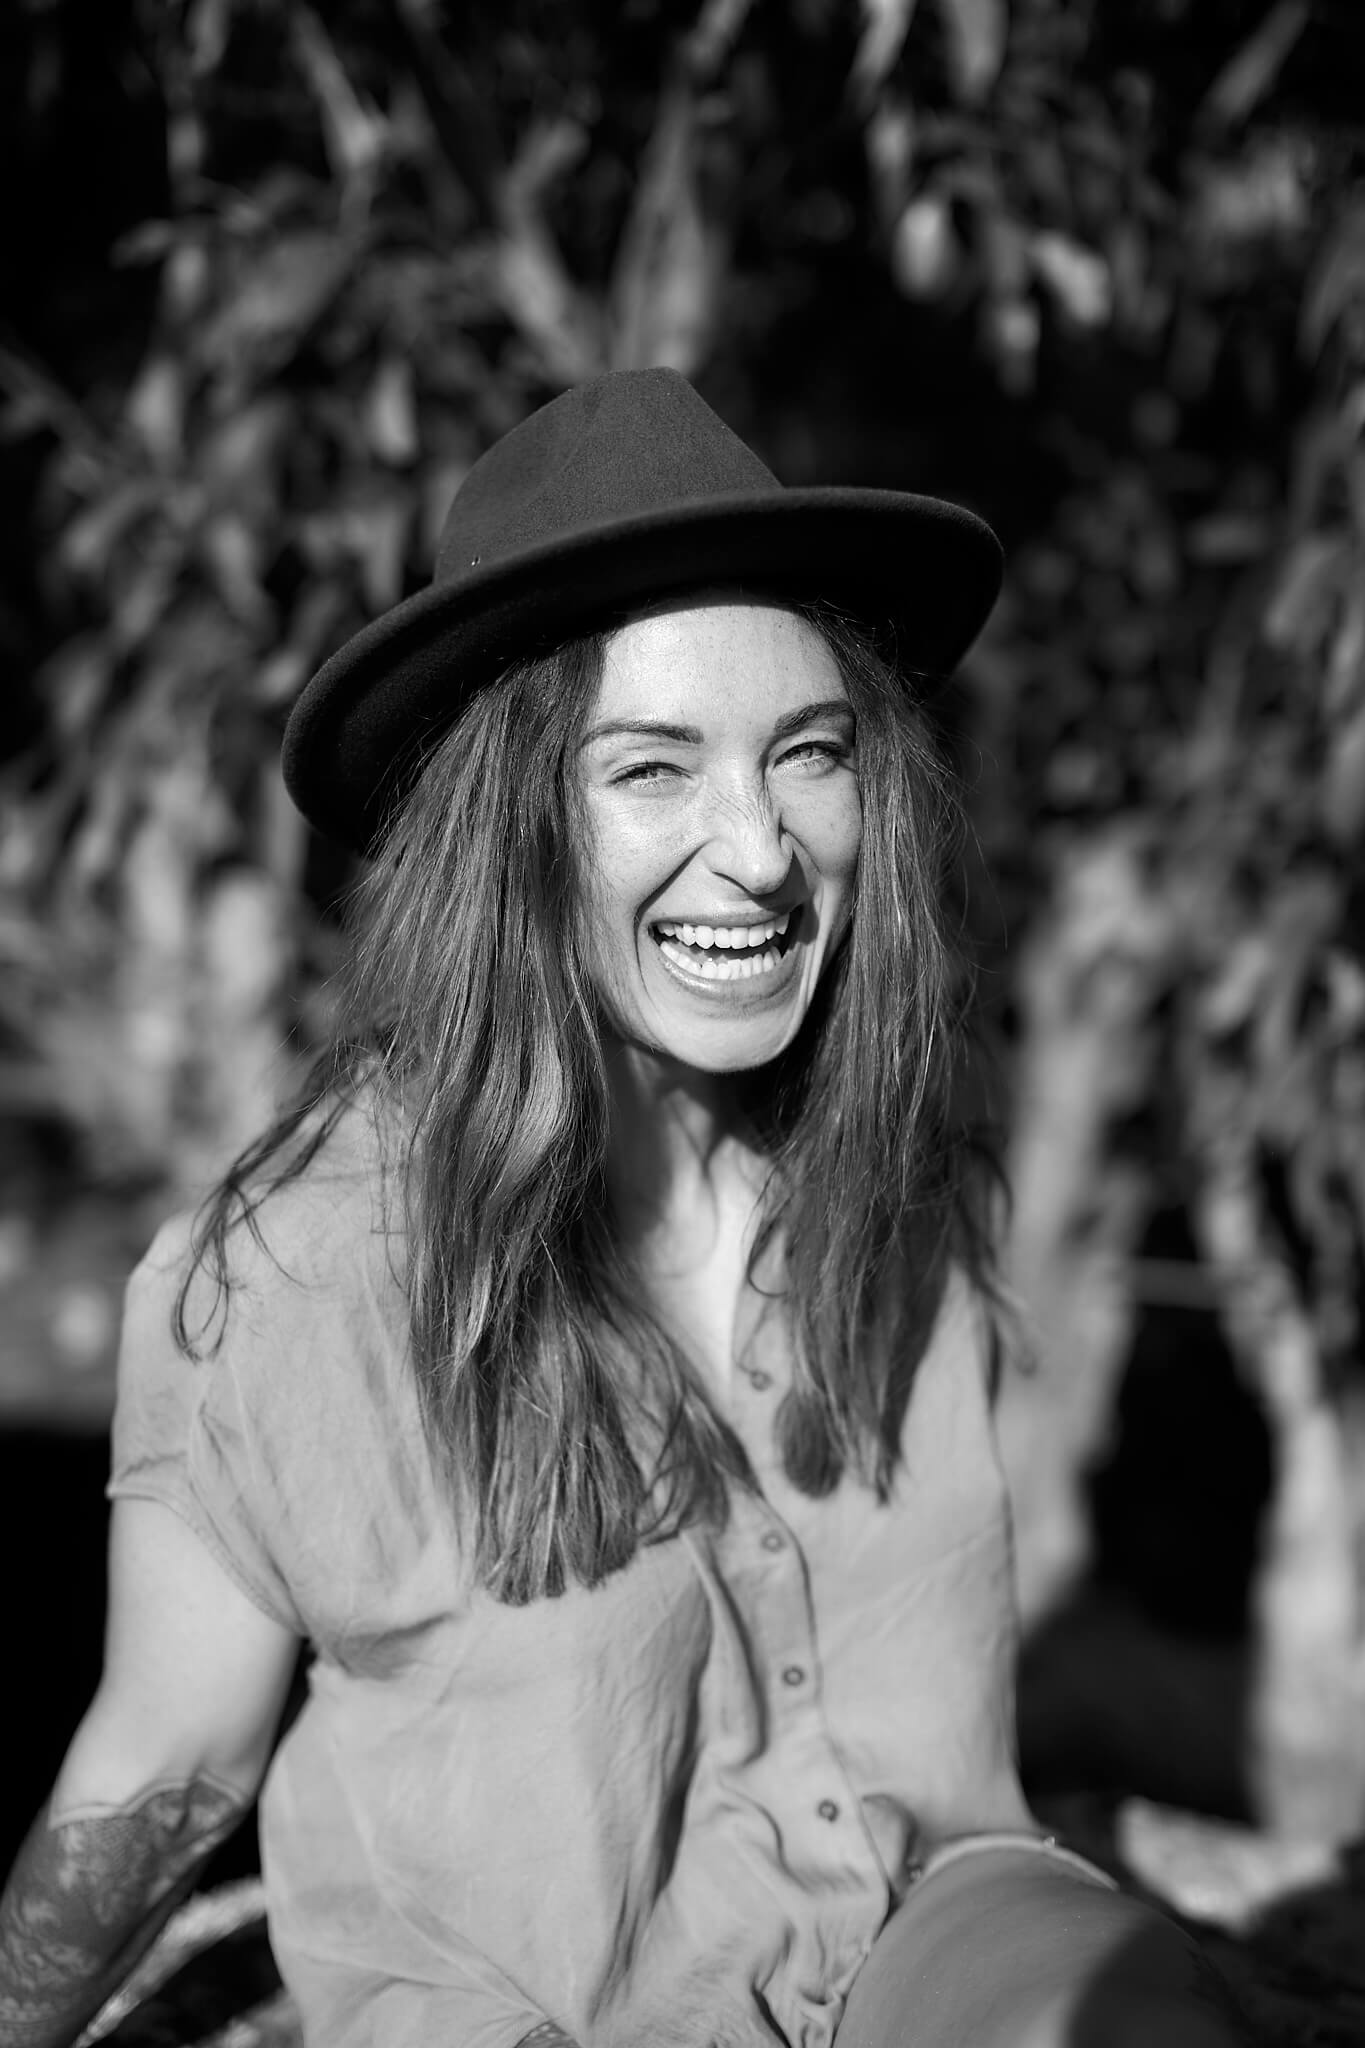 A woman laughing and smiling in the bush wearing a hat